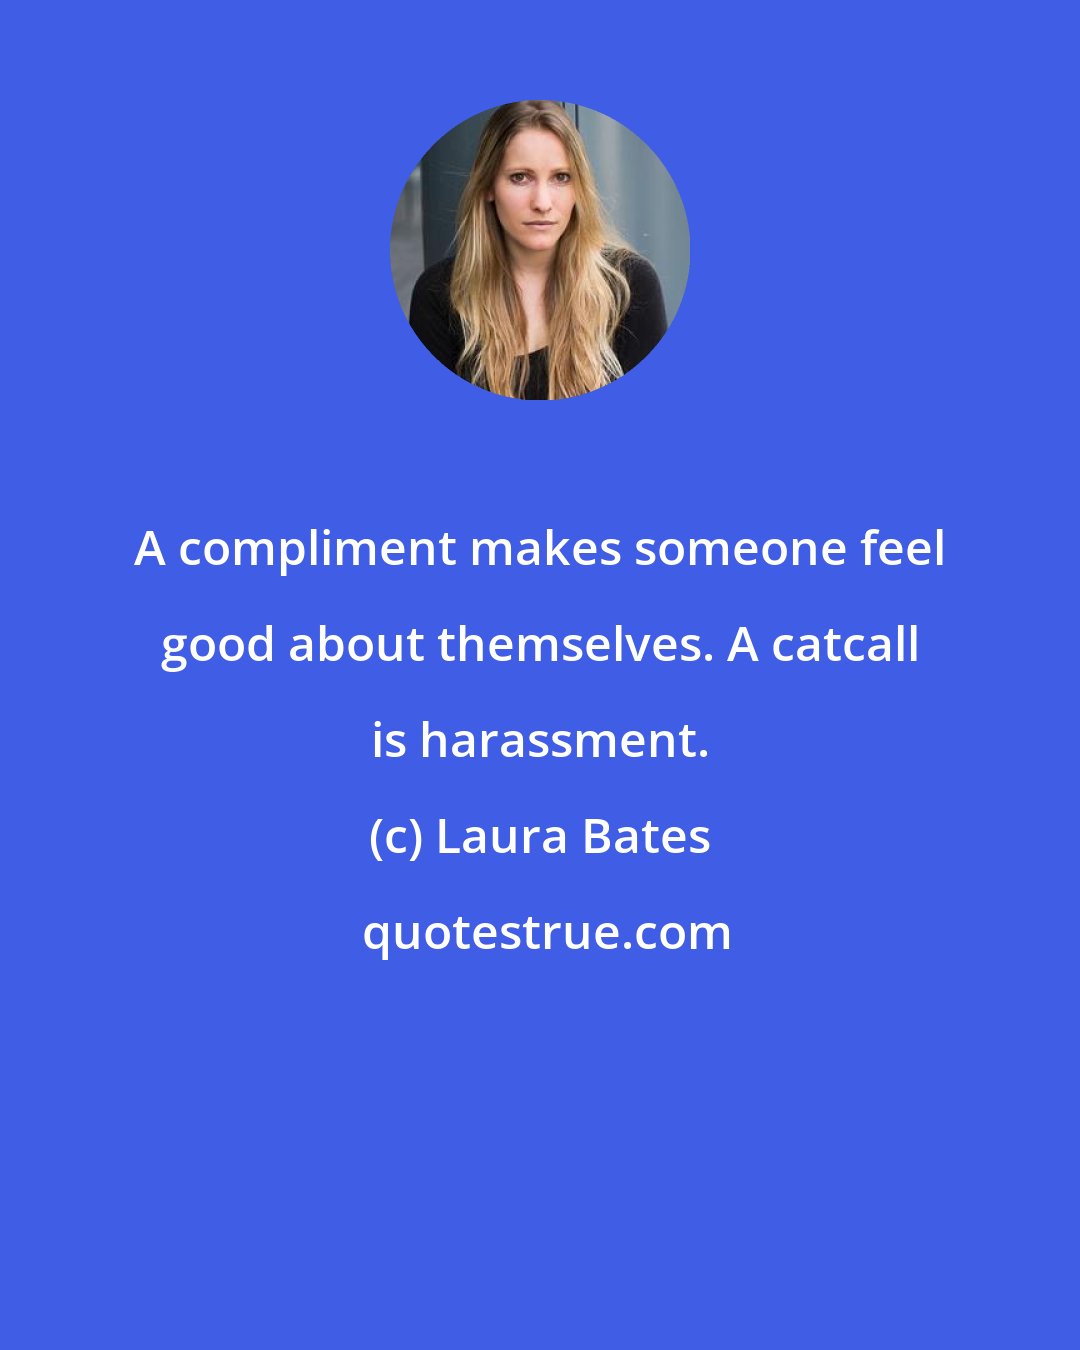 Laura Bates: A compliment makes someone feel good about themselves. A catcall is harassment.